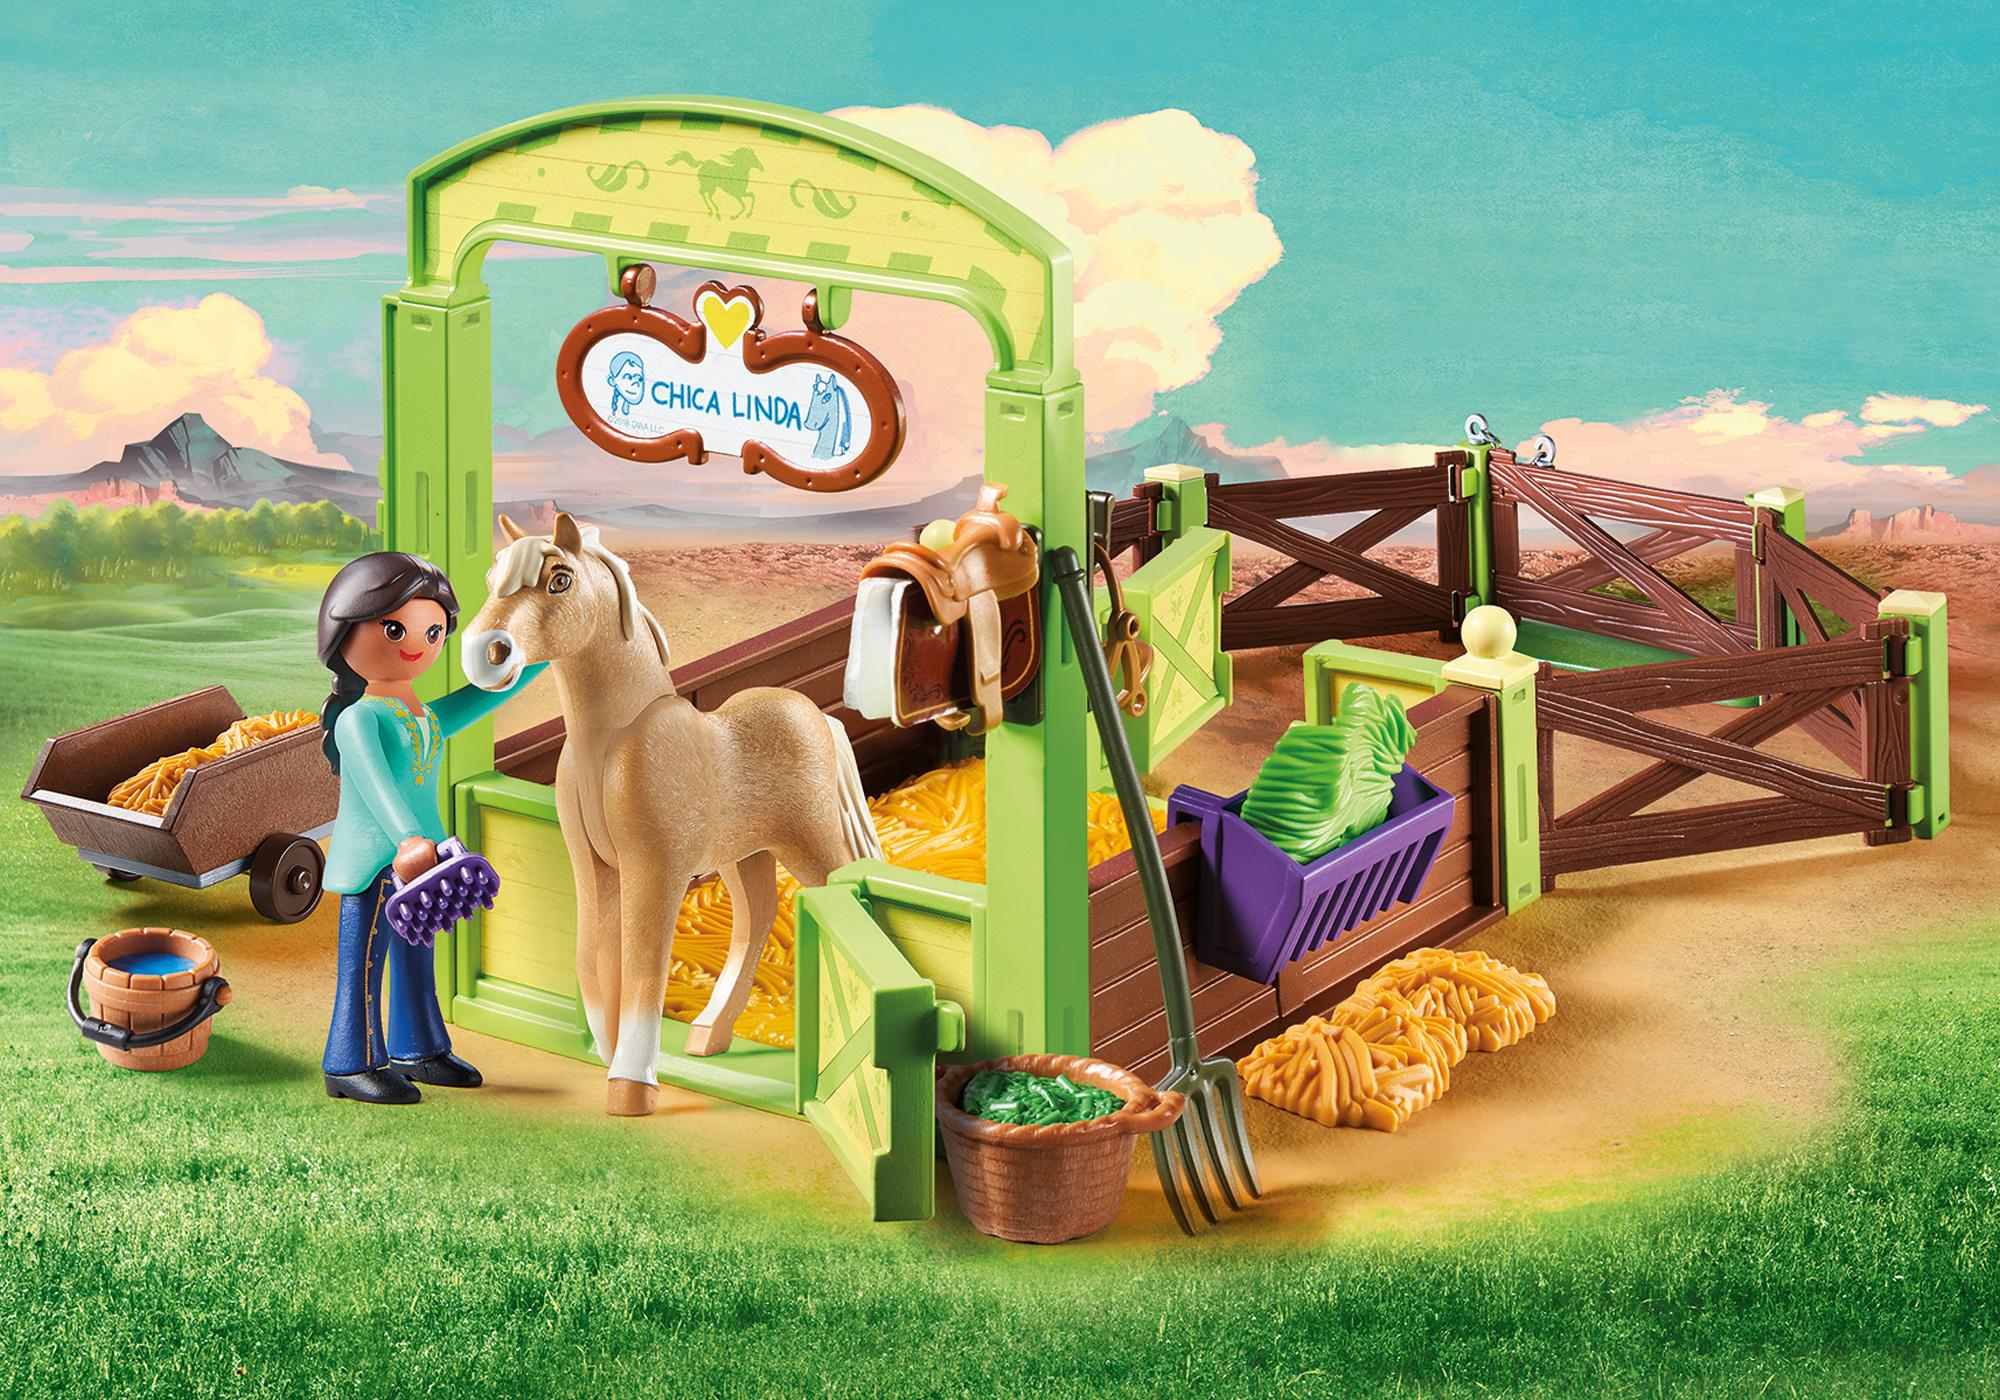 playmobil lucky and spirit with horse stall